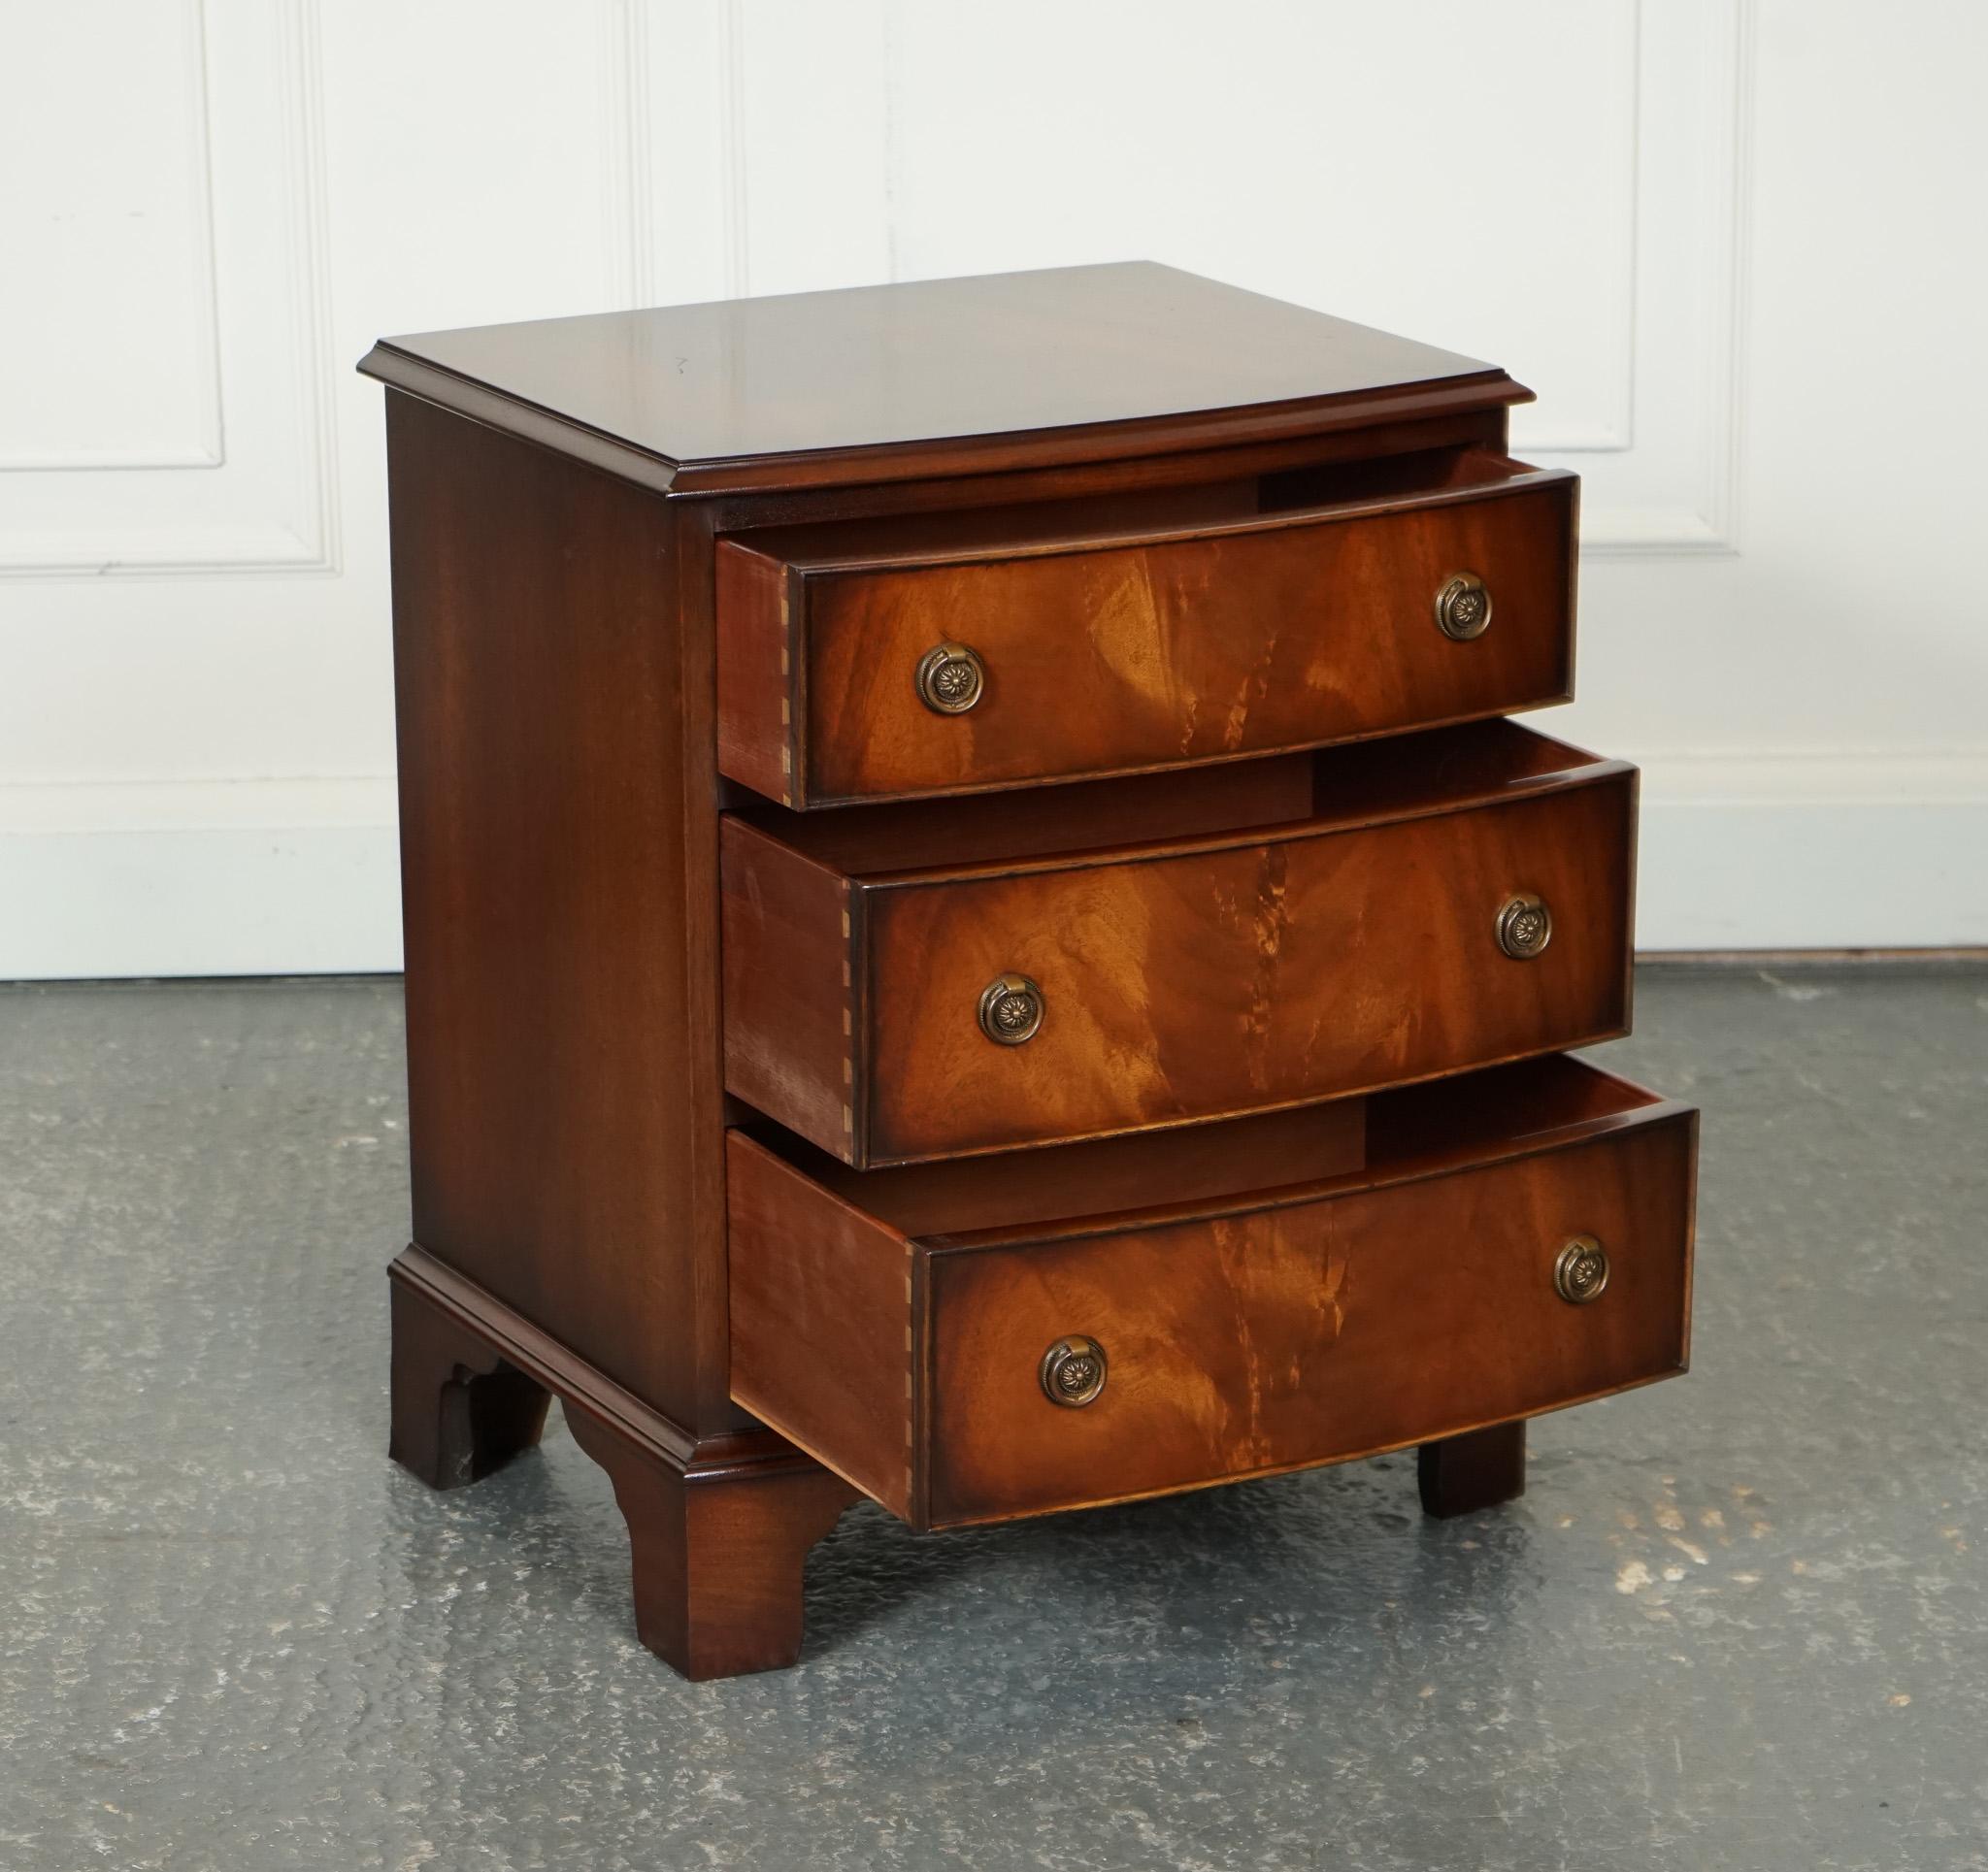 
We are delighted to offer for sale this Vintage Bevan Funnell Style Chest Of Drawers.

The vintage Georgian style chest of drawers by Bevan Funnell is a true testament to classic elegance and traditional craftsmanship. Made with exquisite attention